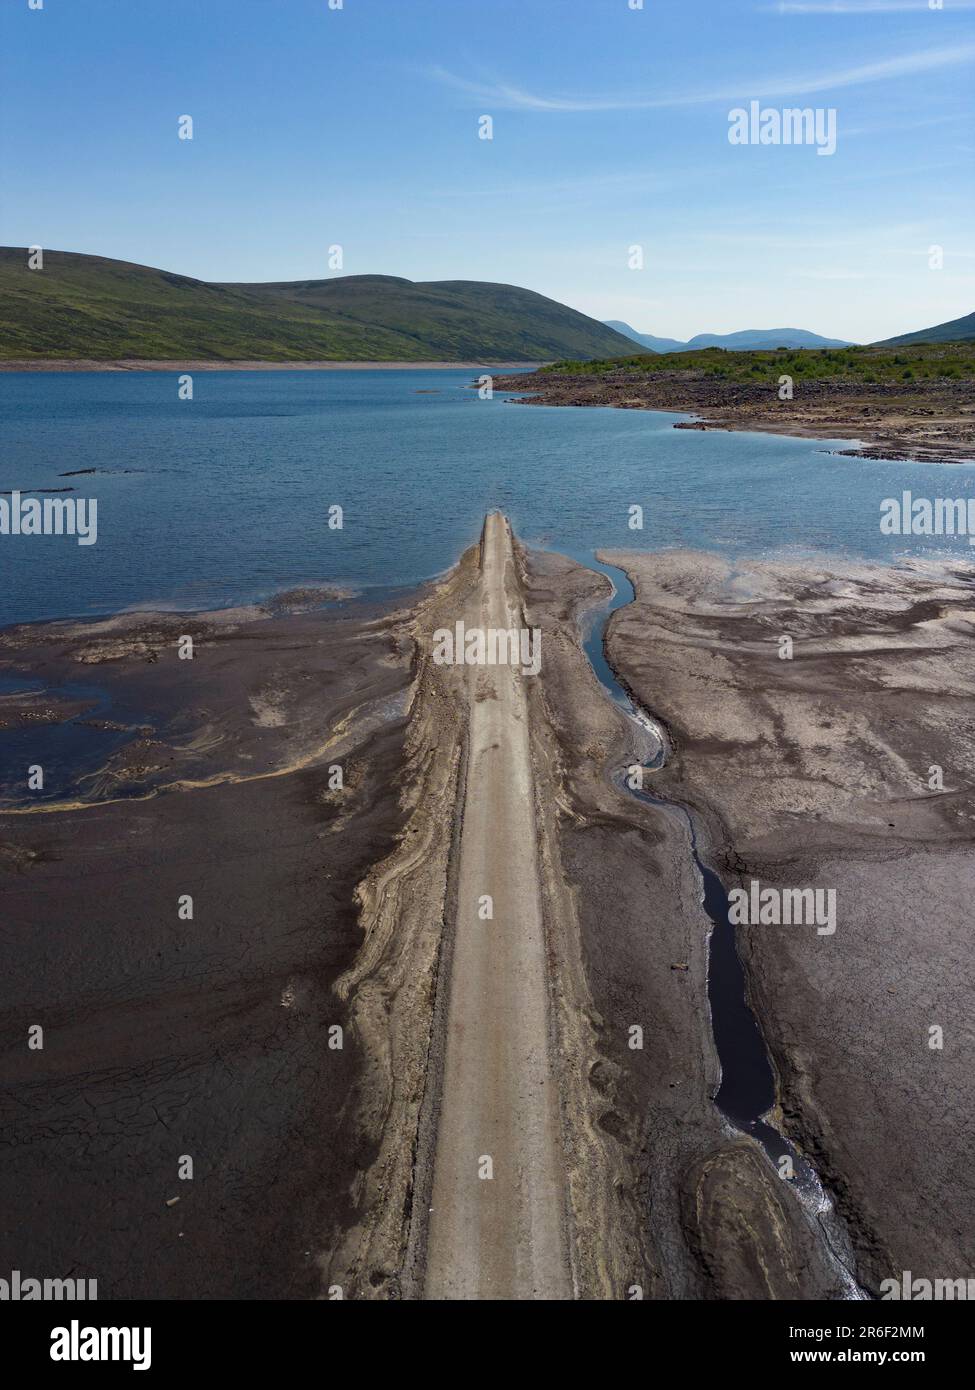 Garve, Scotland, UK. 9th June 2023. Low water levels in Loch Glascarnoch reservoir near Garve south of Ullapool have revealed the route of the old road from Ullapool to Dingwall. The road and bridges are normally submerged under water, however recent drought conditions have led to warnings of possible water restrictions. Iain Masterton/Alamy Live News Stock Photo